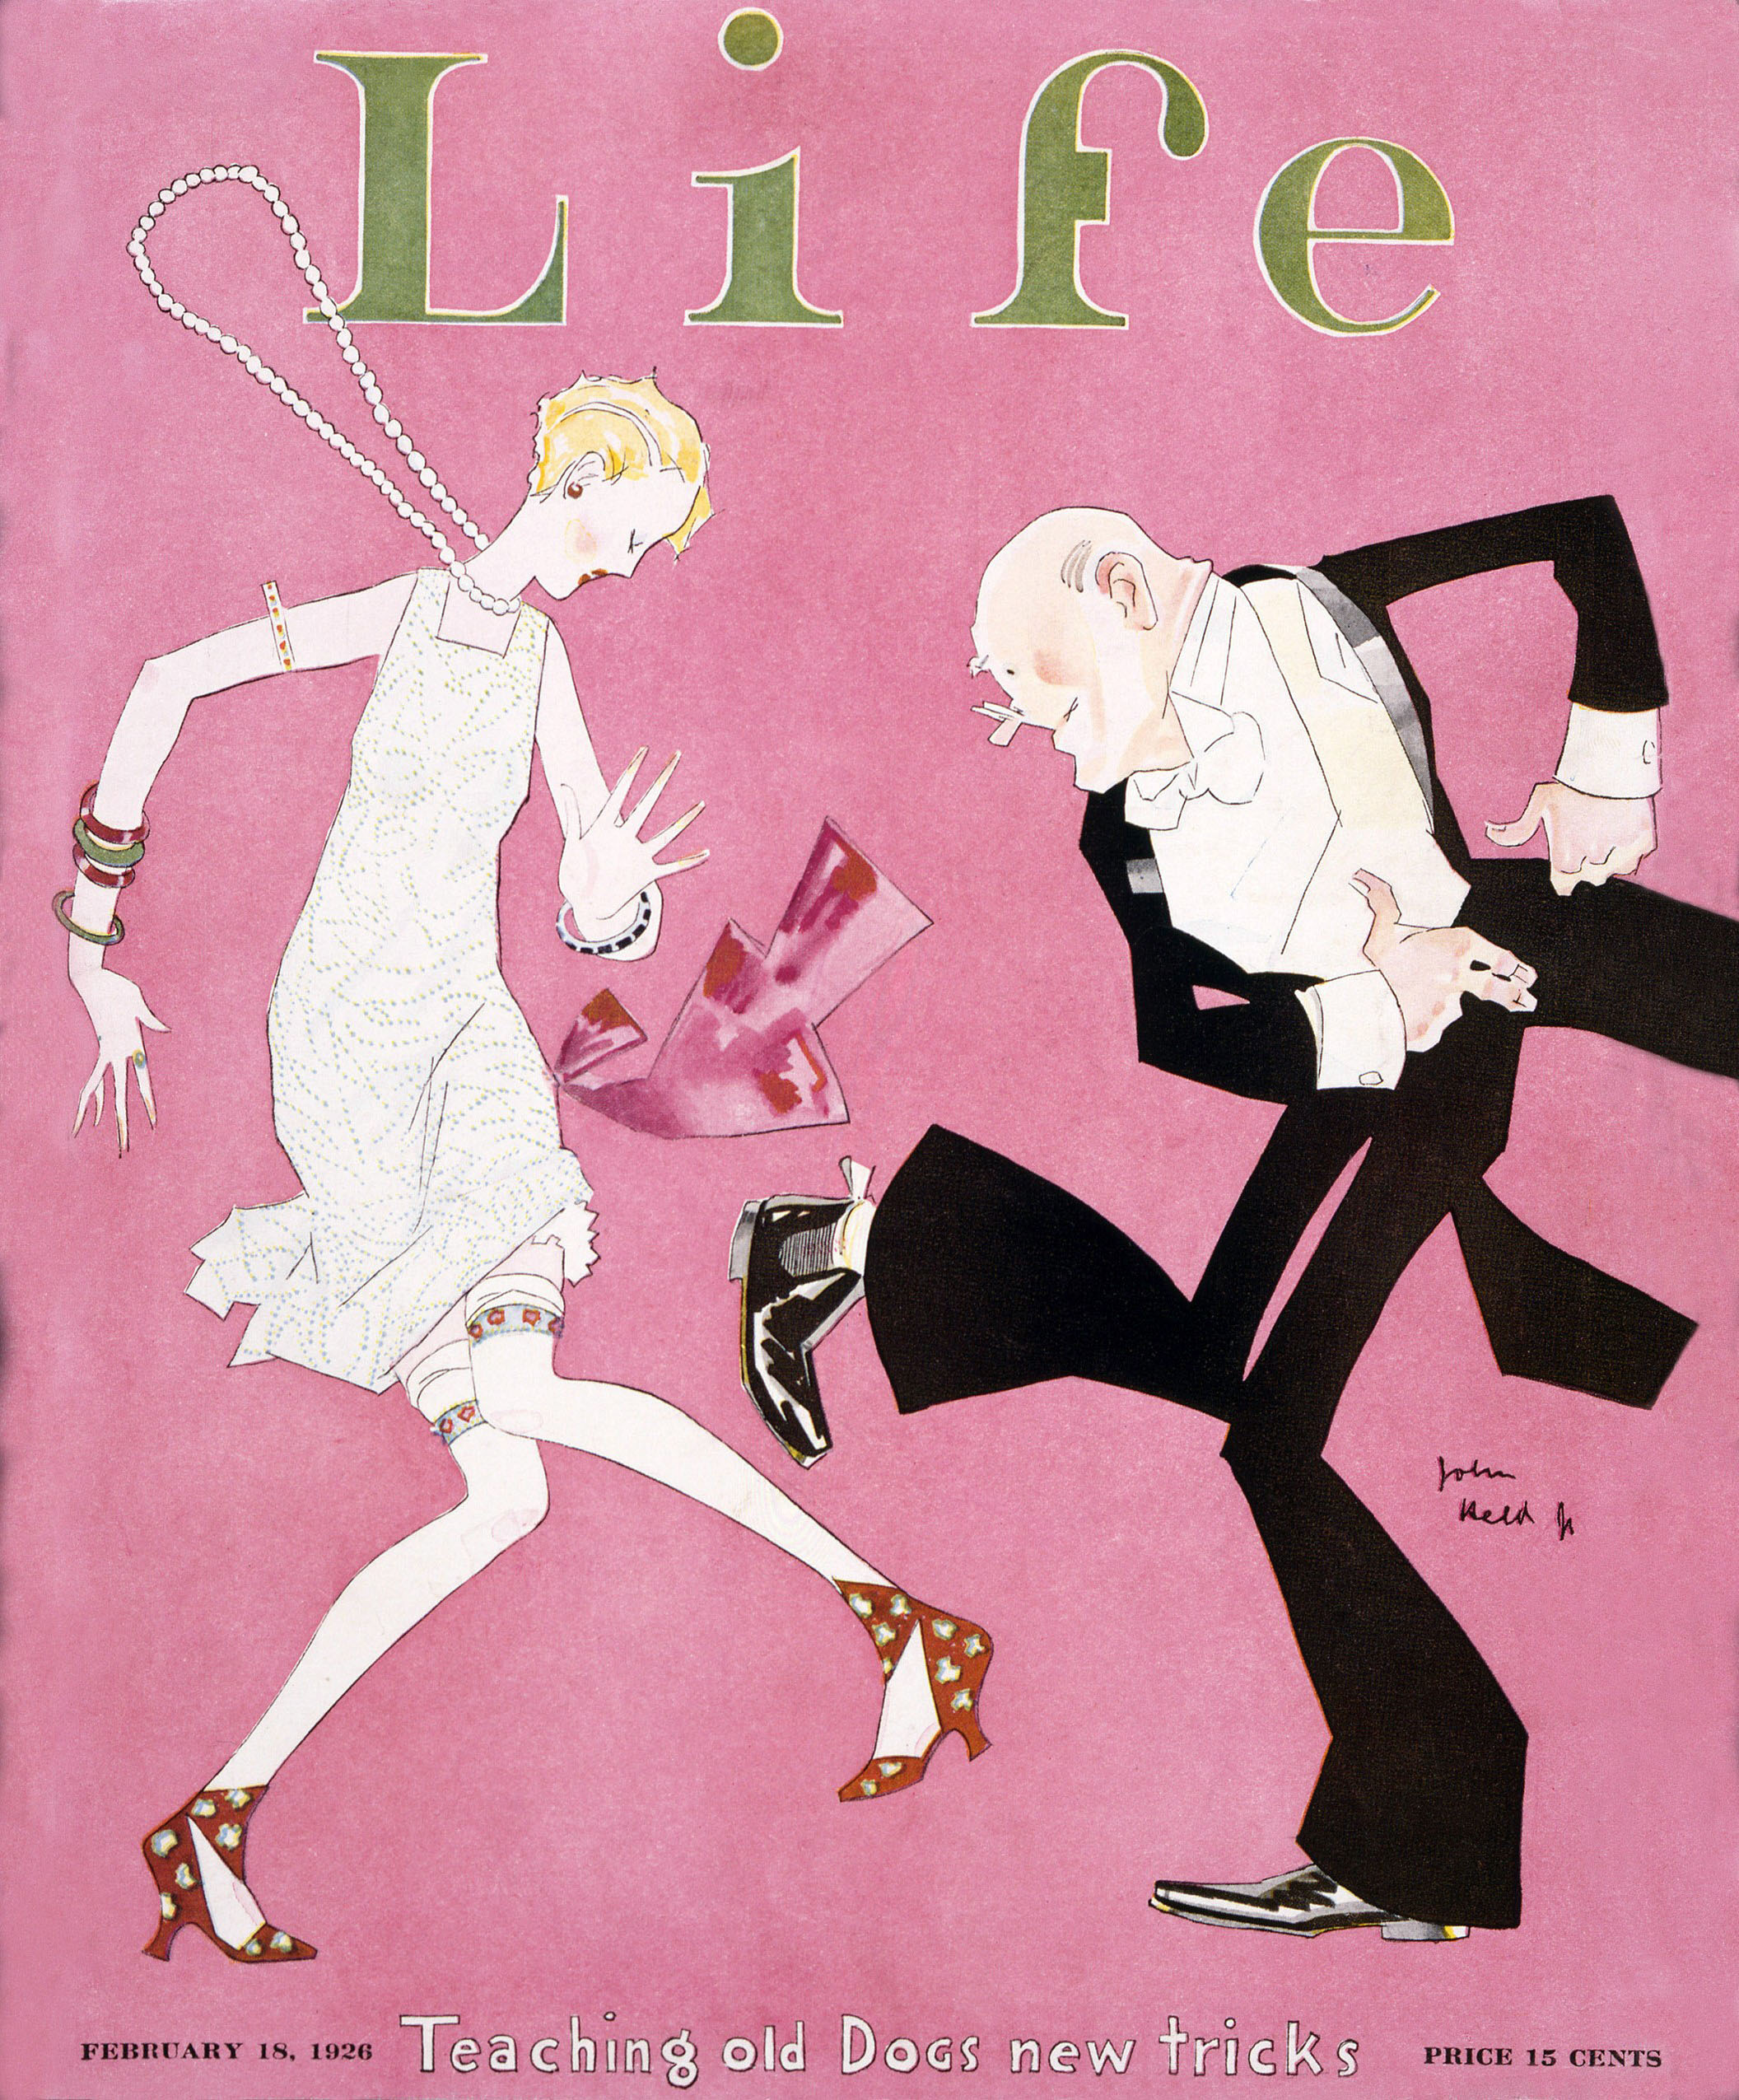 1926 Life magazine cover with a pink background shows an old man dressed in white tie dancing with a flapper